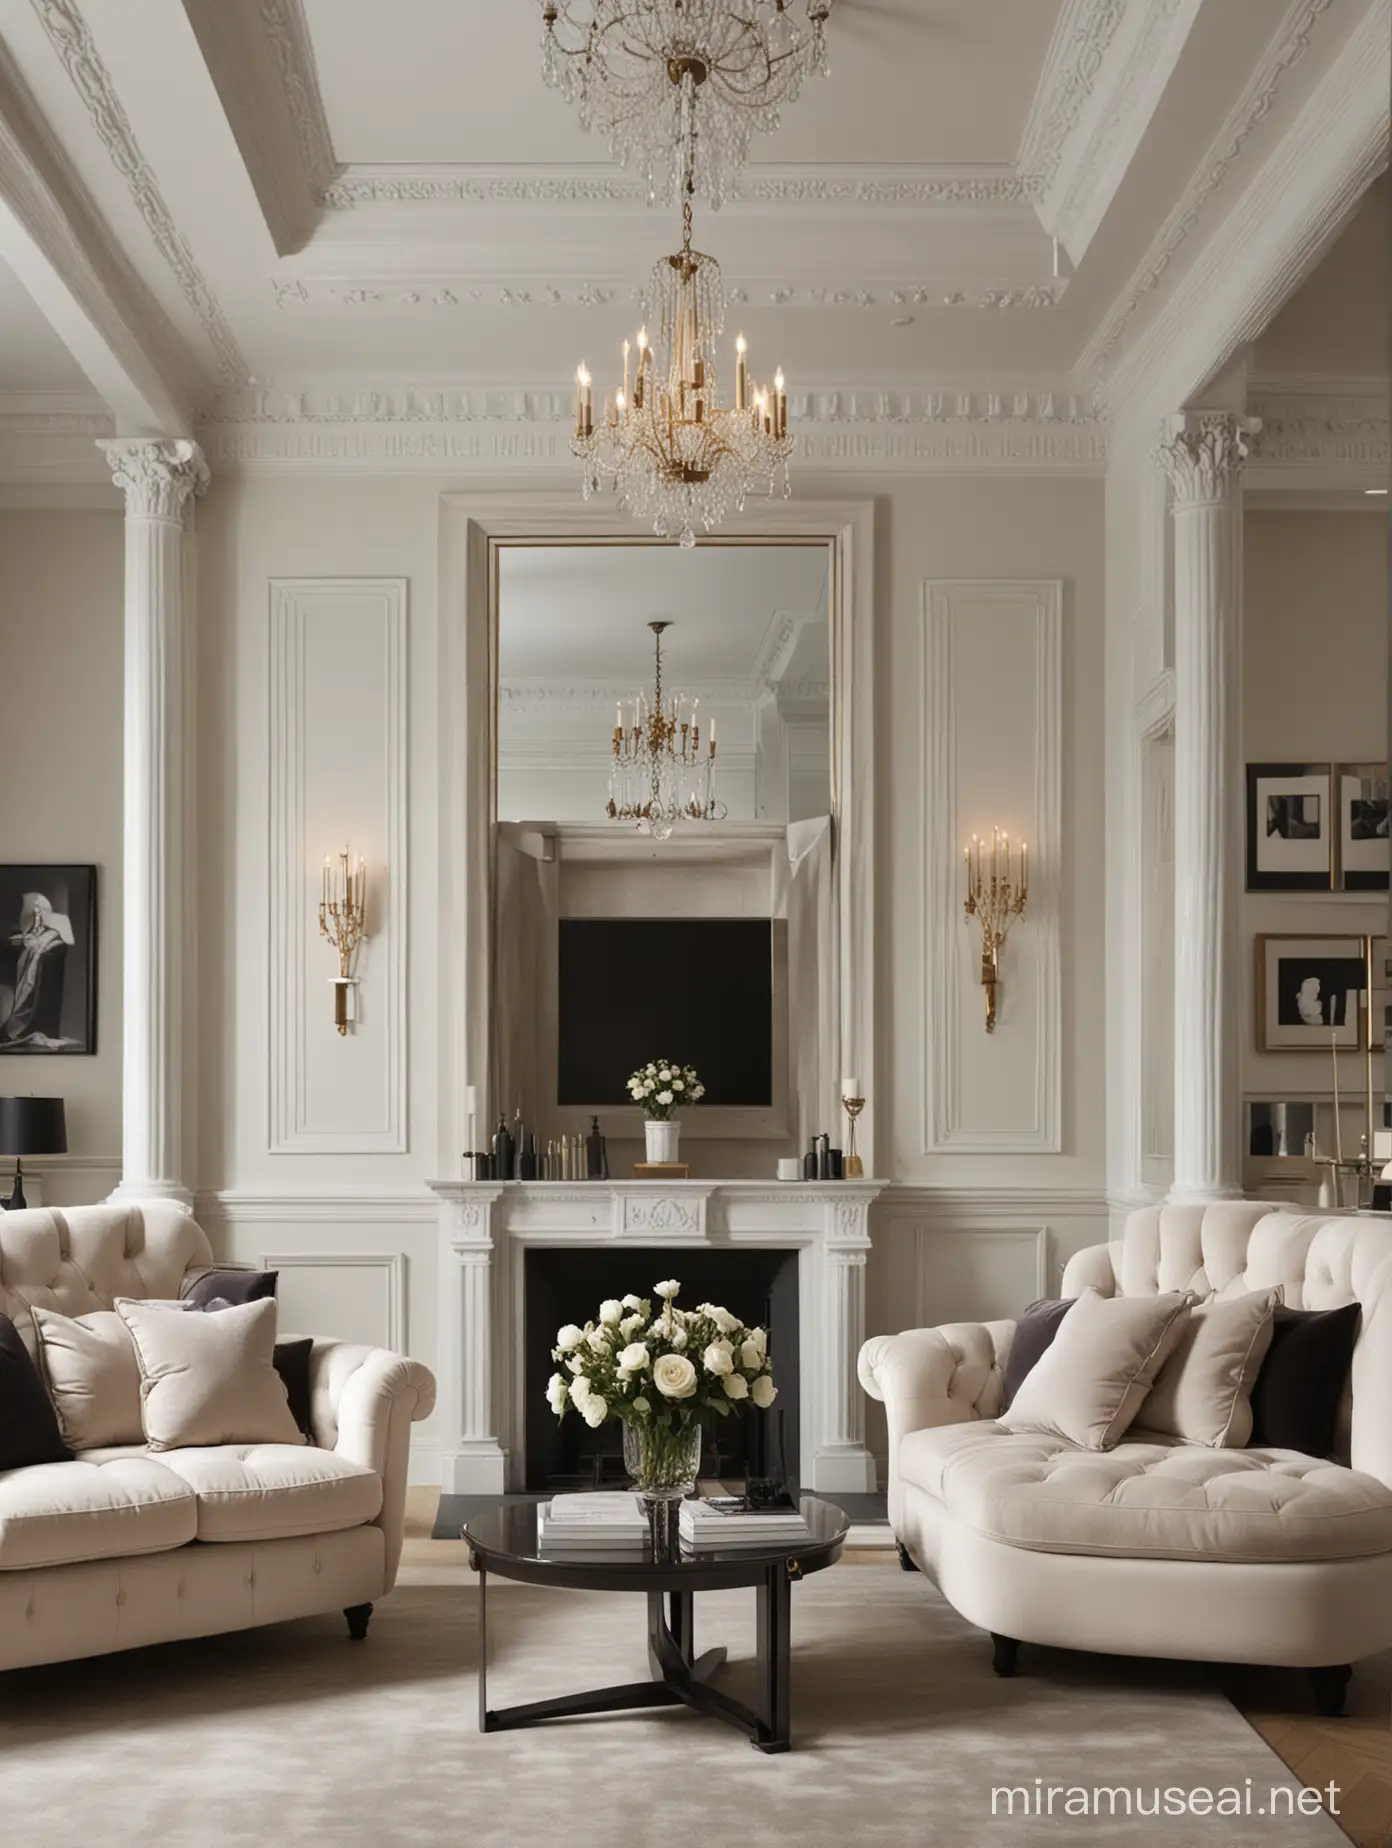 Modern London Interior Design with Classical Touch